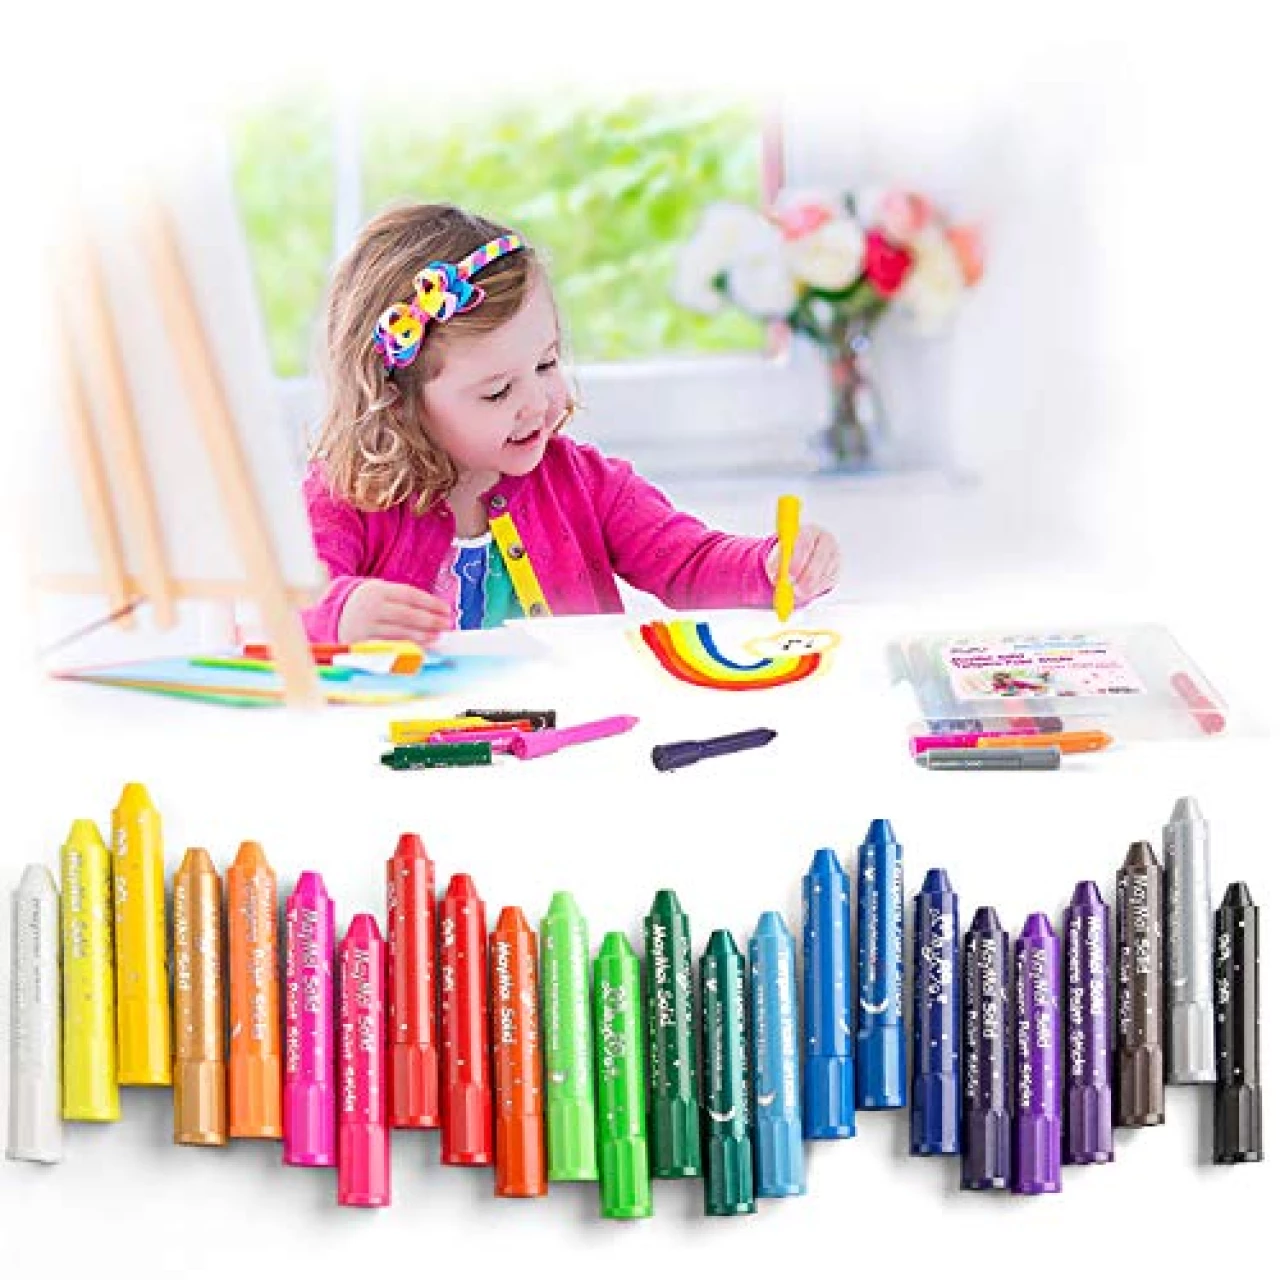 MayMoi Tempera Paint Sticks, Washable Paint Sticks for Kids, Non-Toxic, Quick Drying &amp; No Mess (24 Bright Colors)